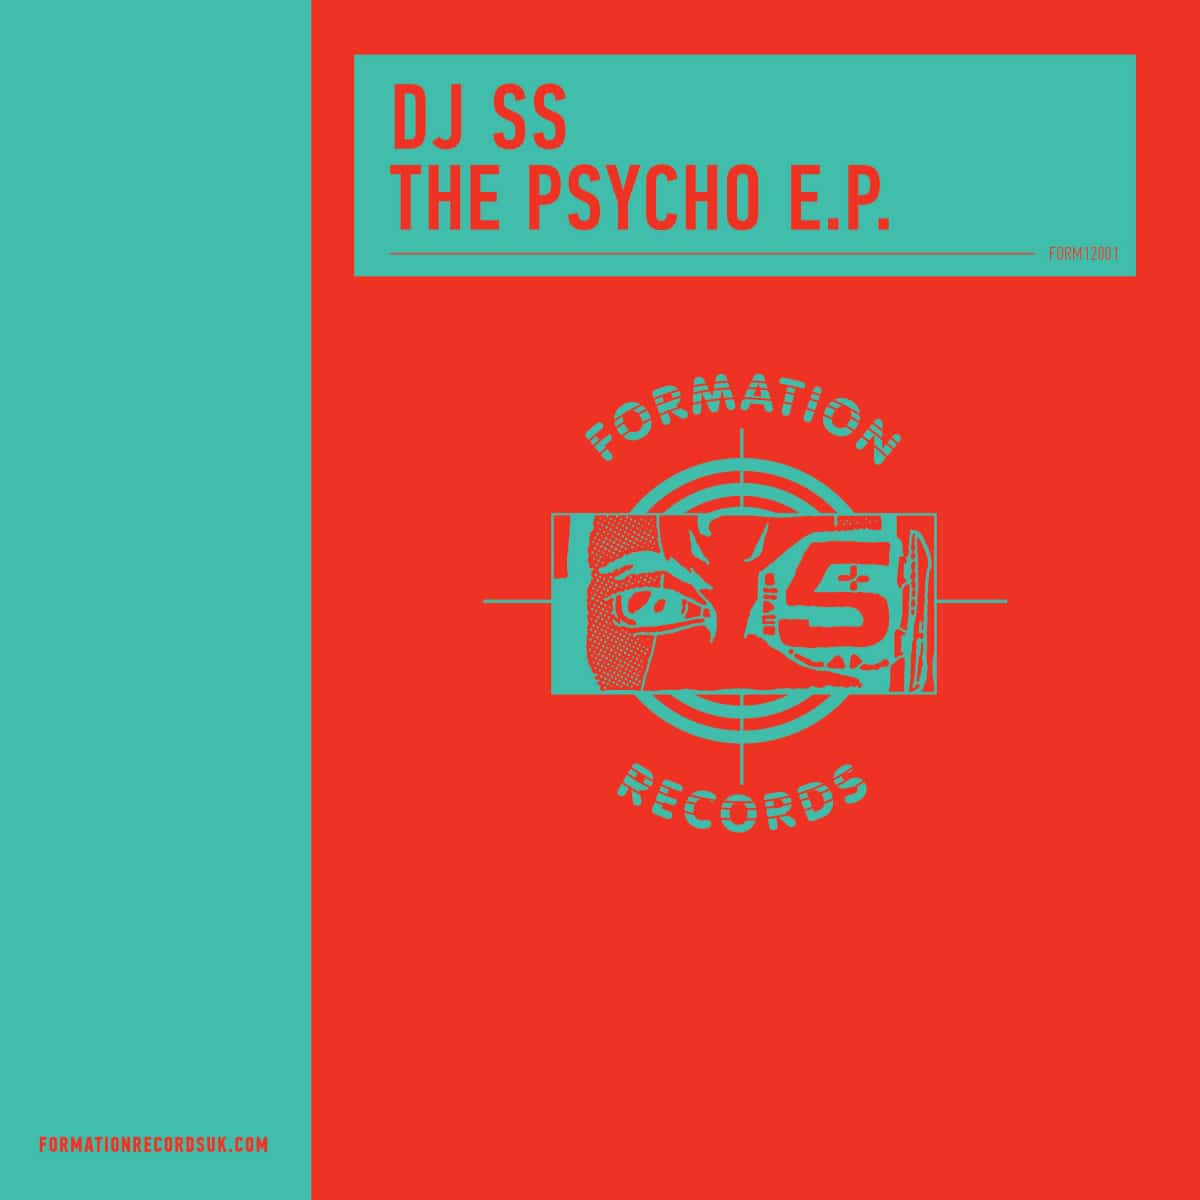 DJ SS - The Psycho EP - FORM12001 - FORMATION